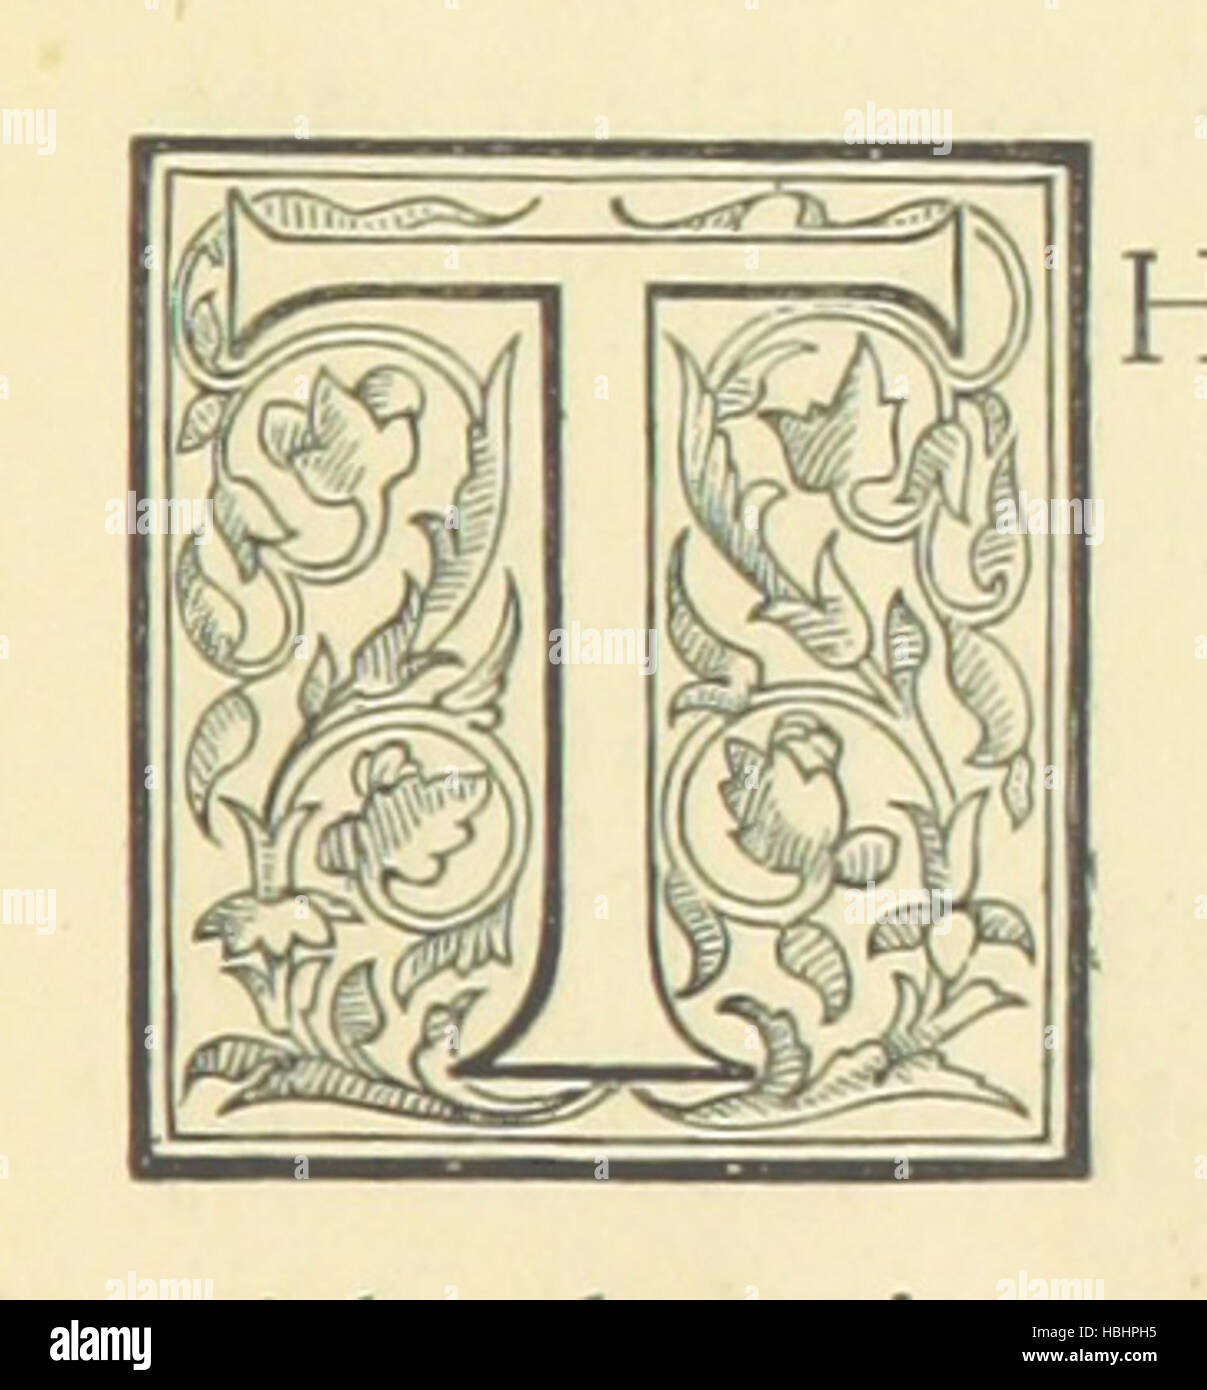 Image taken from page 13 of 'The Royal Courts of Justice. Illustrated handbook. By the author of the “Royal Courts of Justice Guide and Directory.” [The preface signed: E. D.]' Image taken from page 13 of 'The Royal Courts of Stock Photo